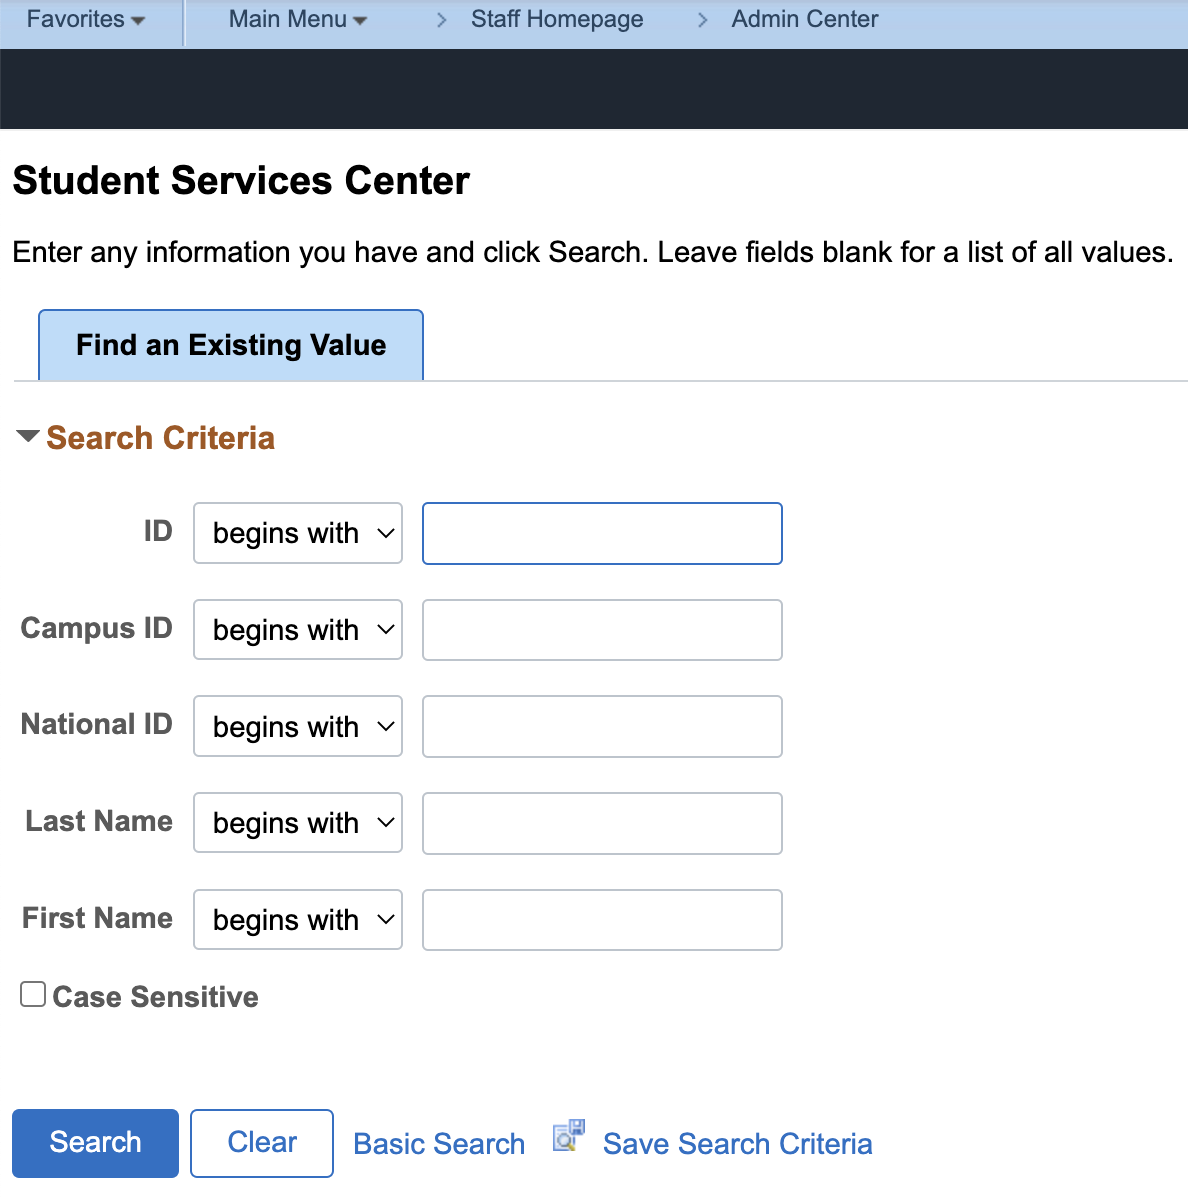 Search Criteria includes: ID, Campus ID, National ID, Last Name, and First Name.